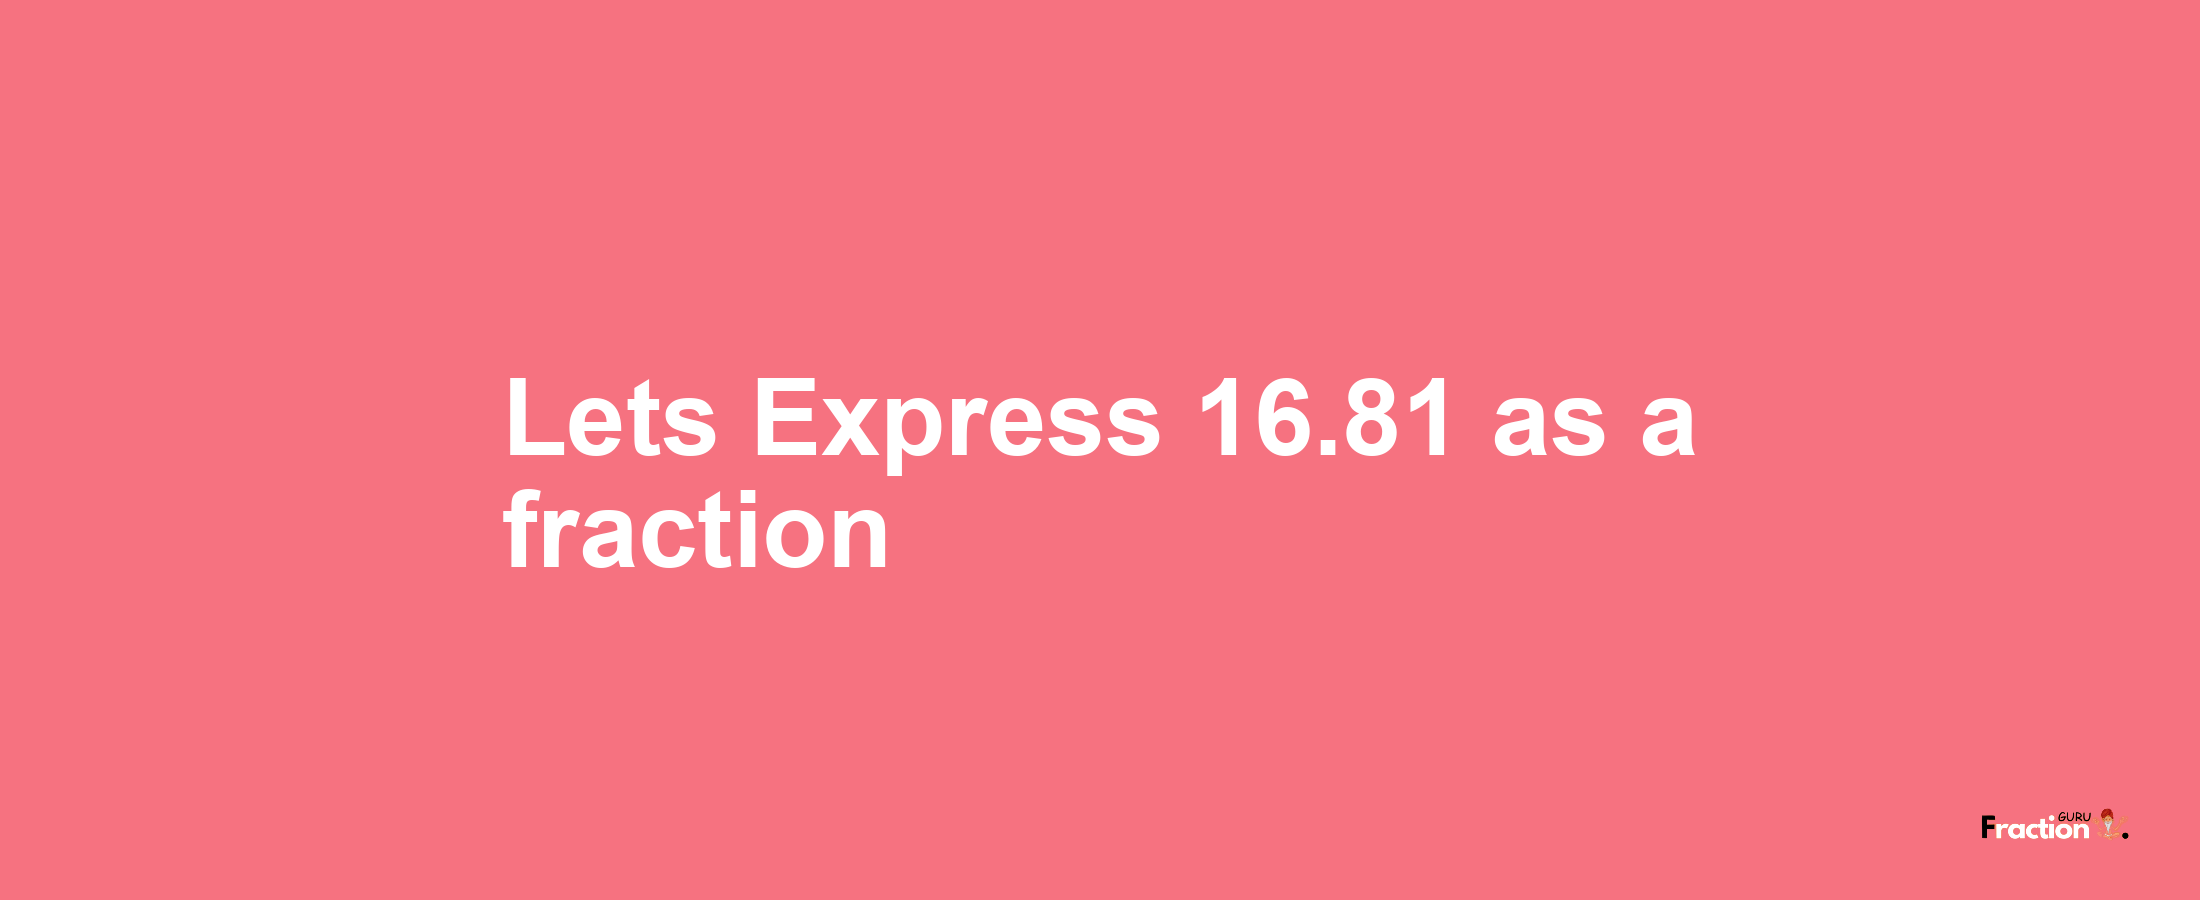 Lets Express 16.81 as afraction